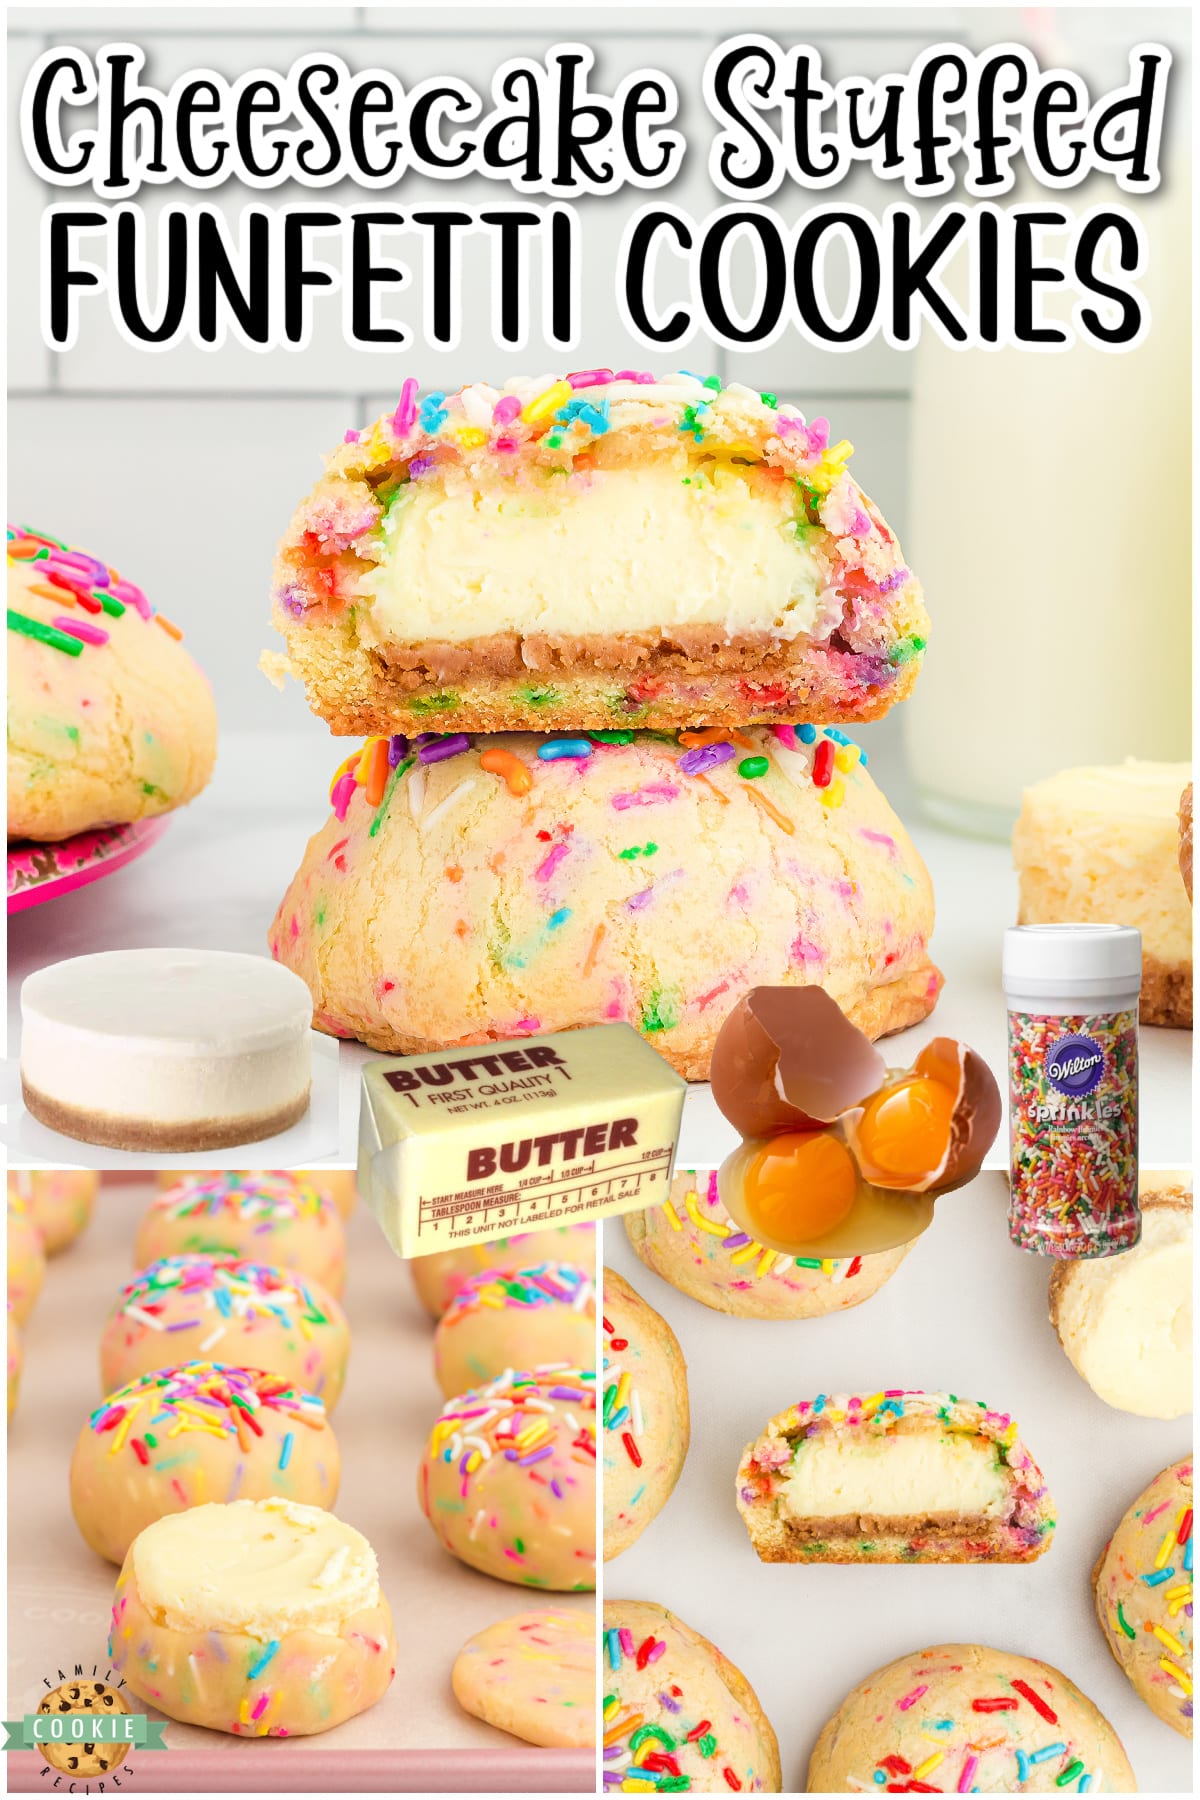 Cheesecake Stuffed Funfetti Cookies are two epic desserts in one: creamy cheesecake stuffed in soft, sweet cookie dough with sprinkles!